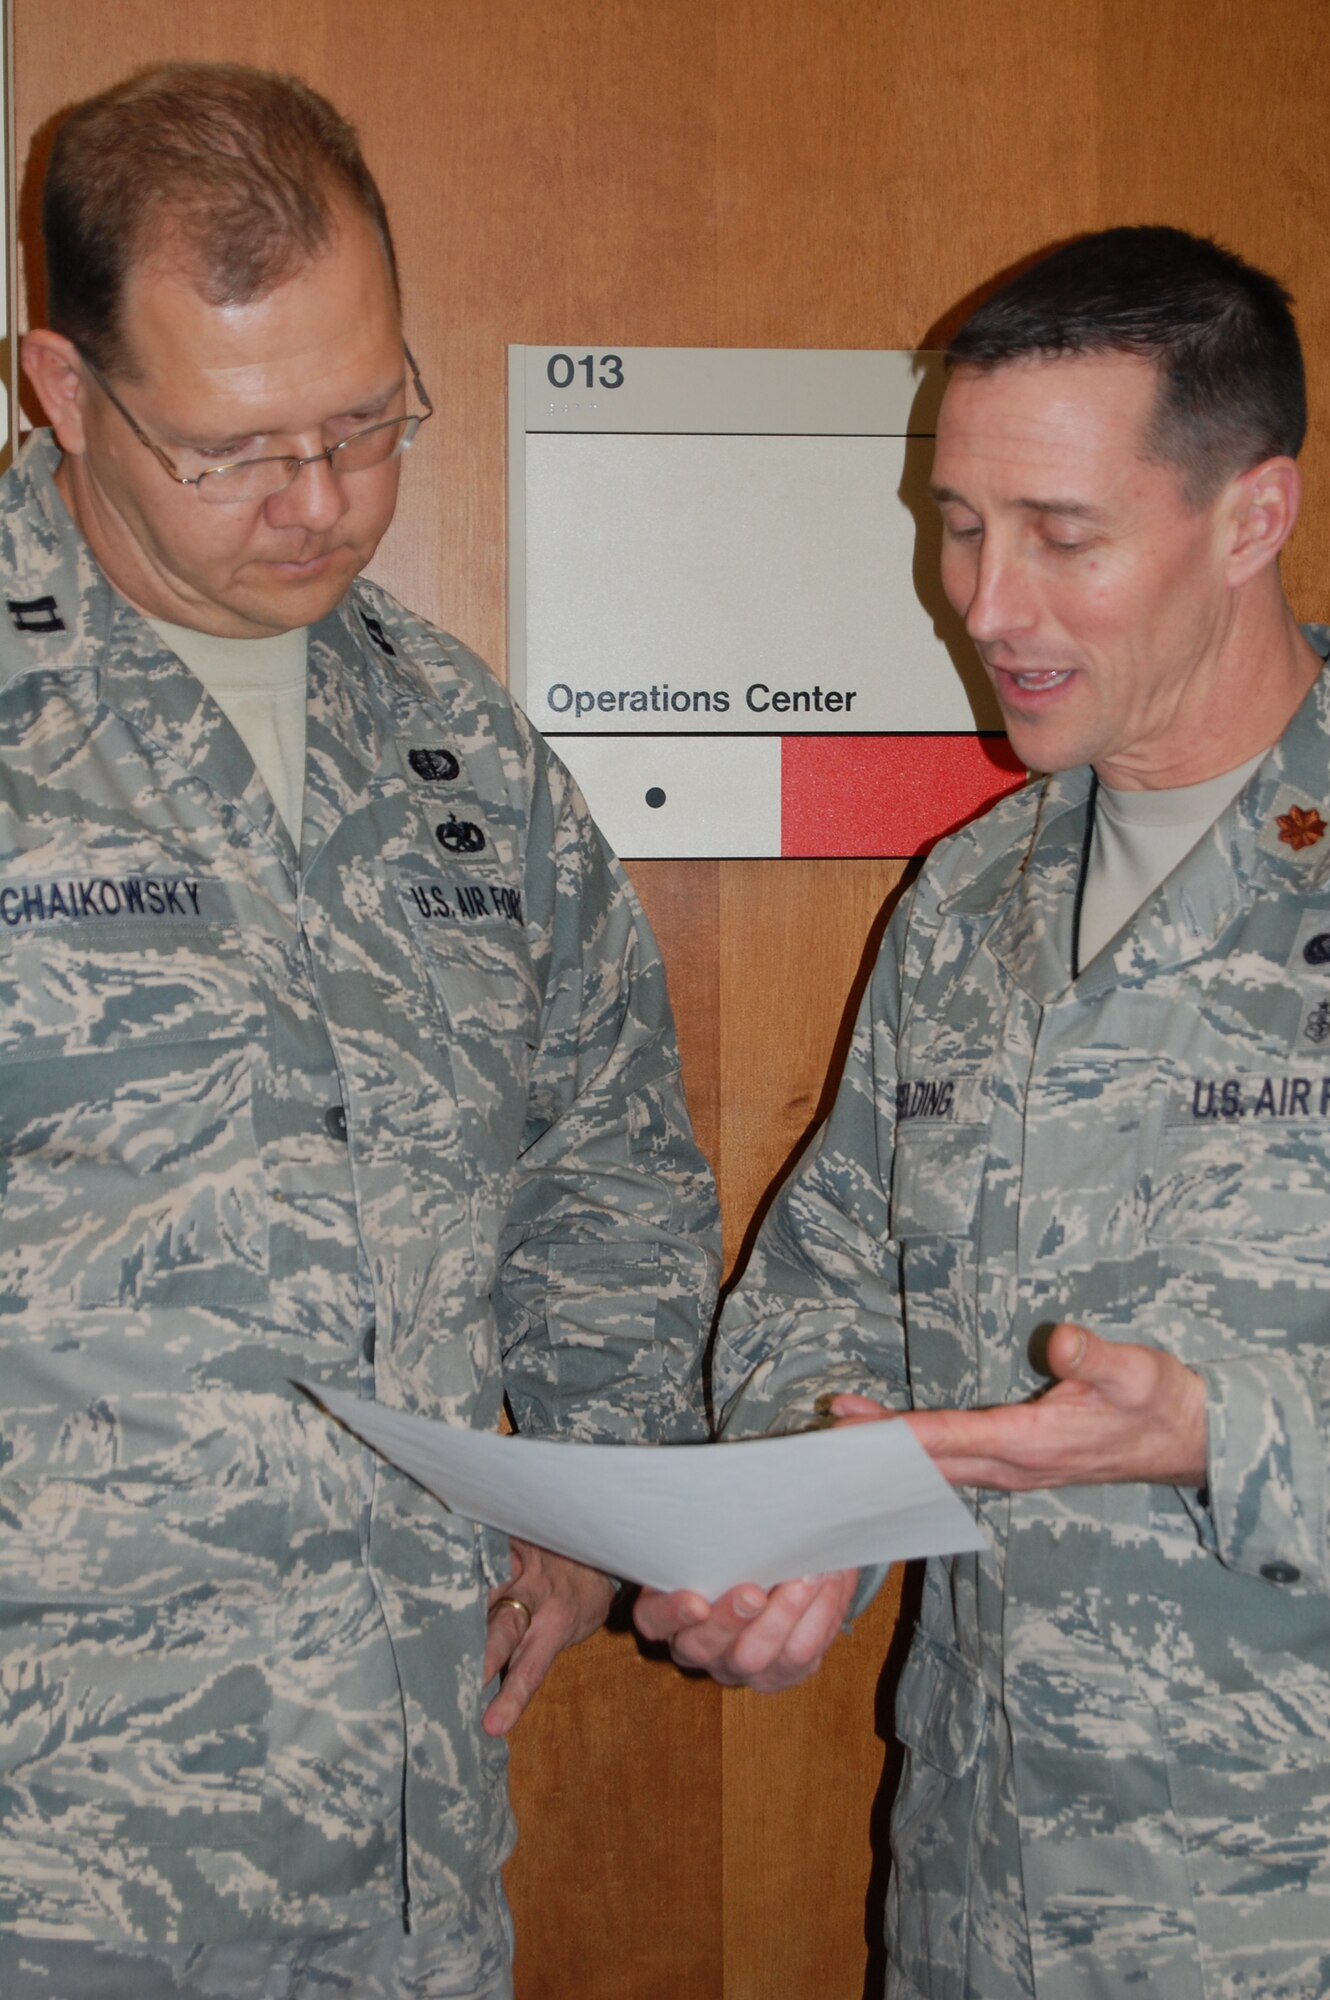 Capt. William Chaikowsky (left) discusses an inbound transfer with
Maj. Scott Uselding outside the Air Force Mortuary Affairs Operation
Center's Command, Control and Communication section. Capt. Chaikowsky is a
Reservist with the 514th Airlift Wing in New Jersey and Maj. Uselding is a
Reservist with the 934th Airlift Wing in Minnesota. Both are currently
deployed to Dover Air Force Base, Del.
